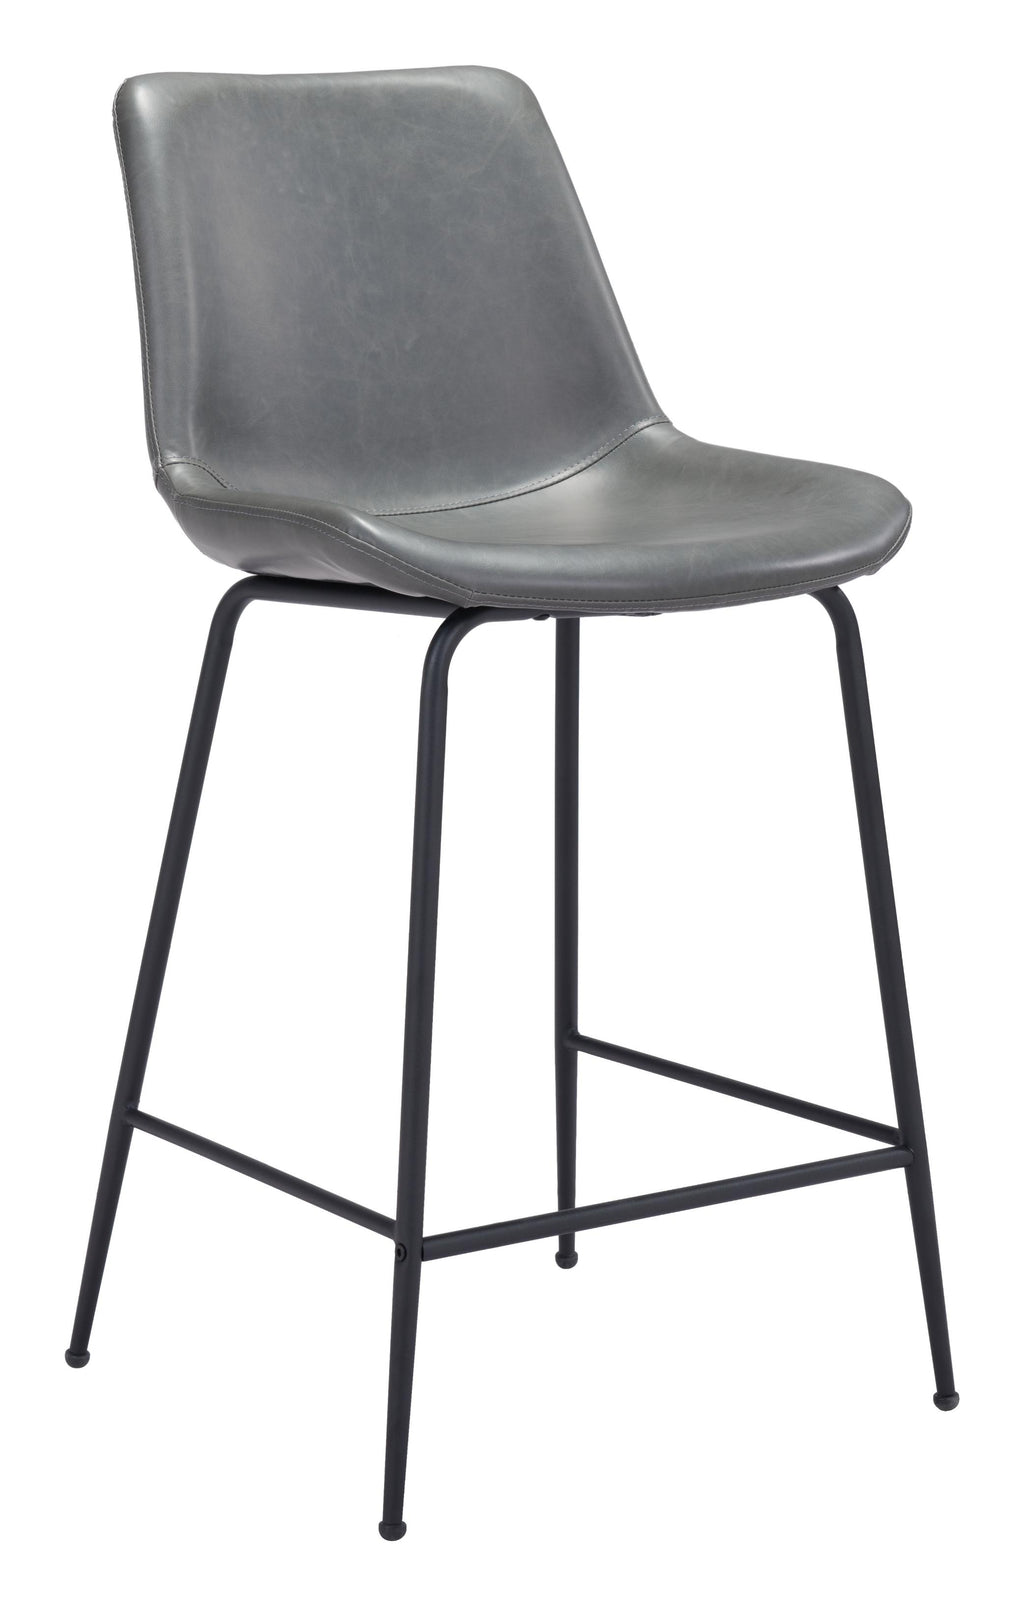 39" Gray And Black Steel Low Back Counter Height Bar Chair With Footrest